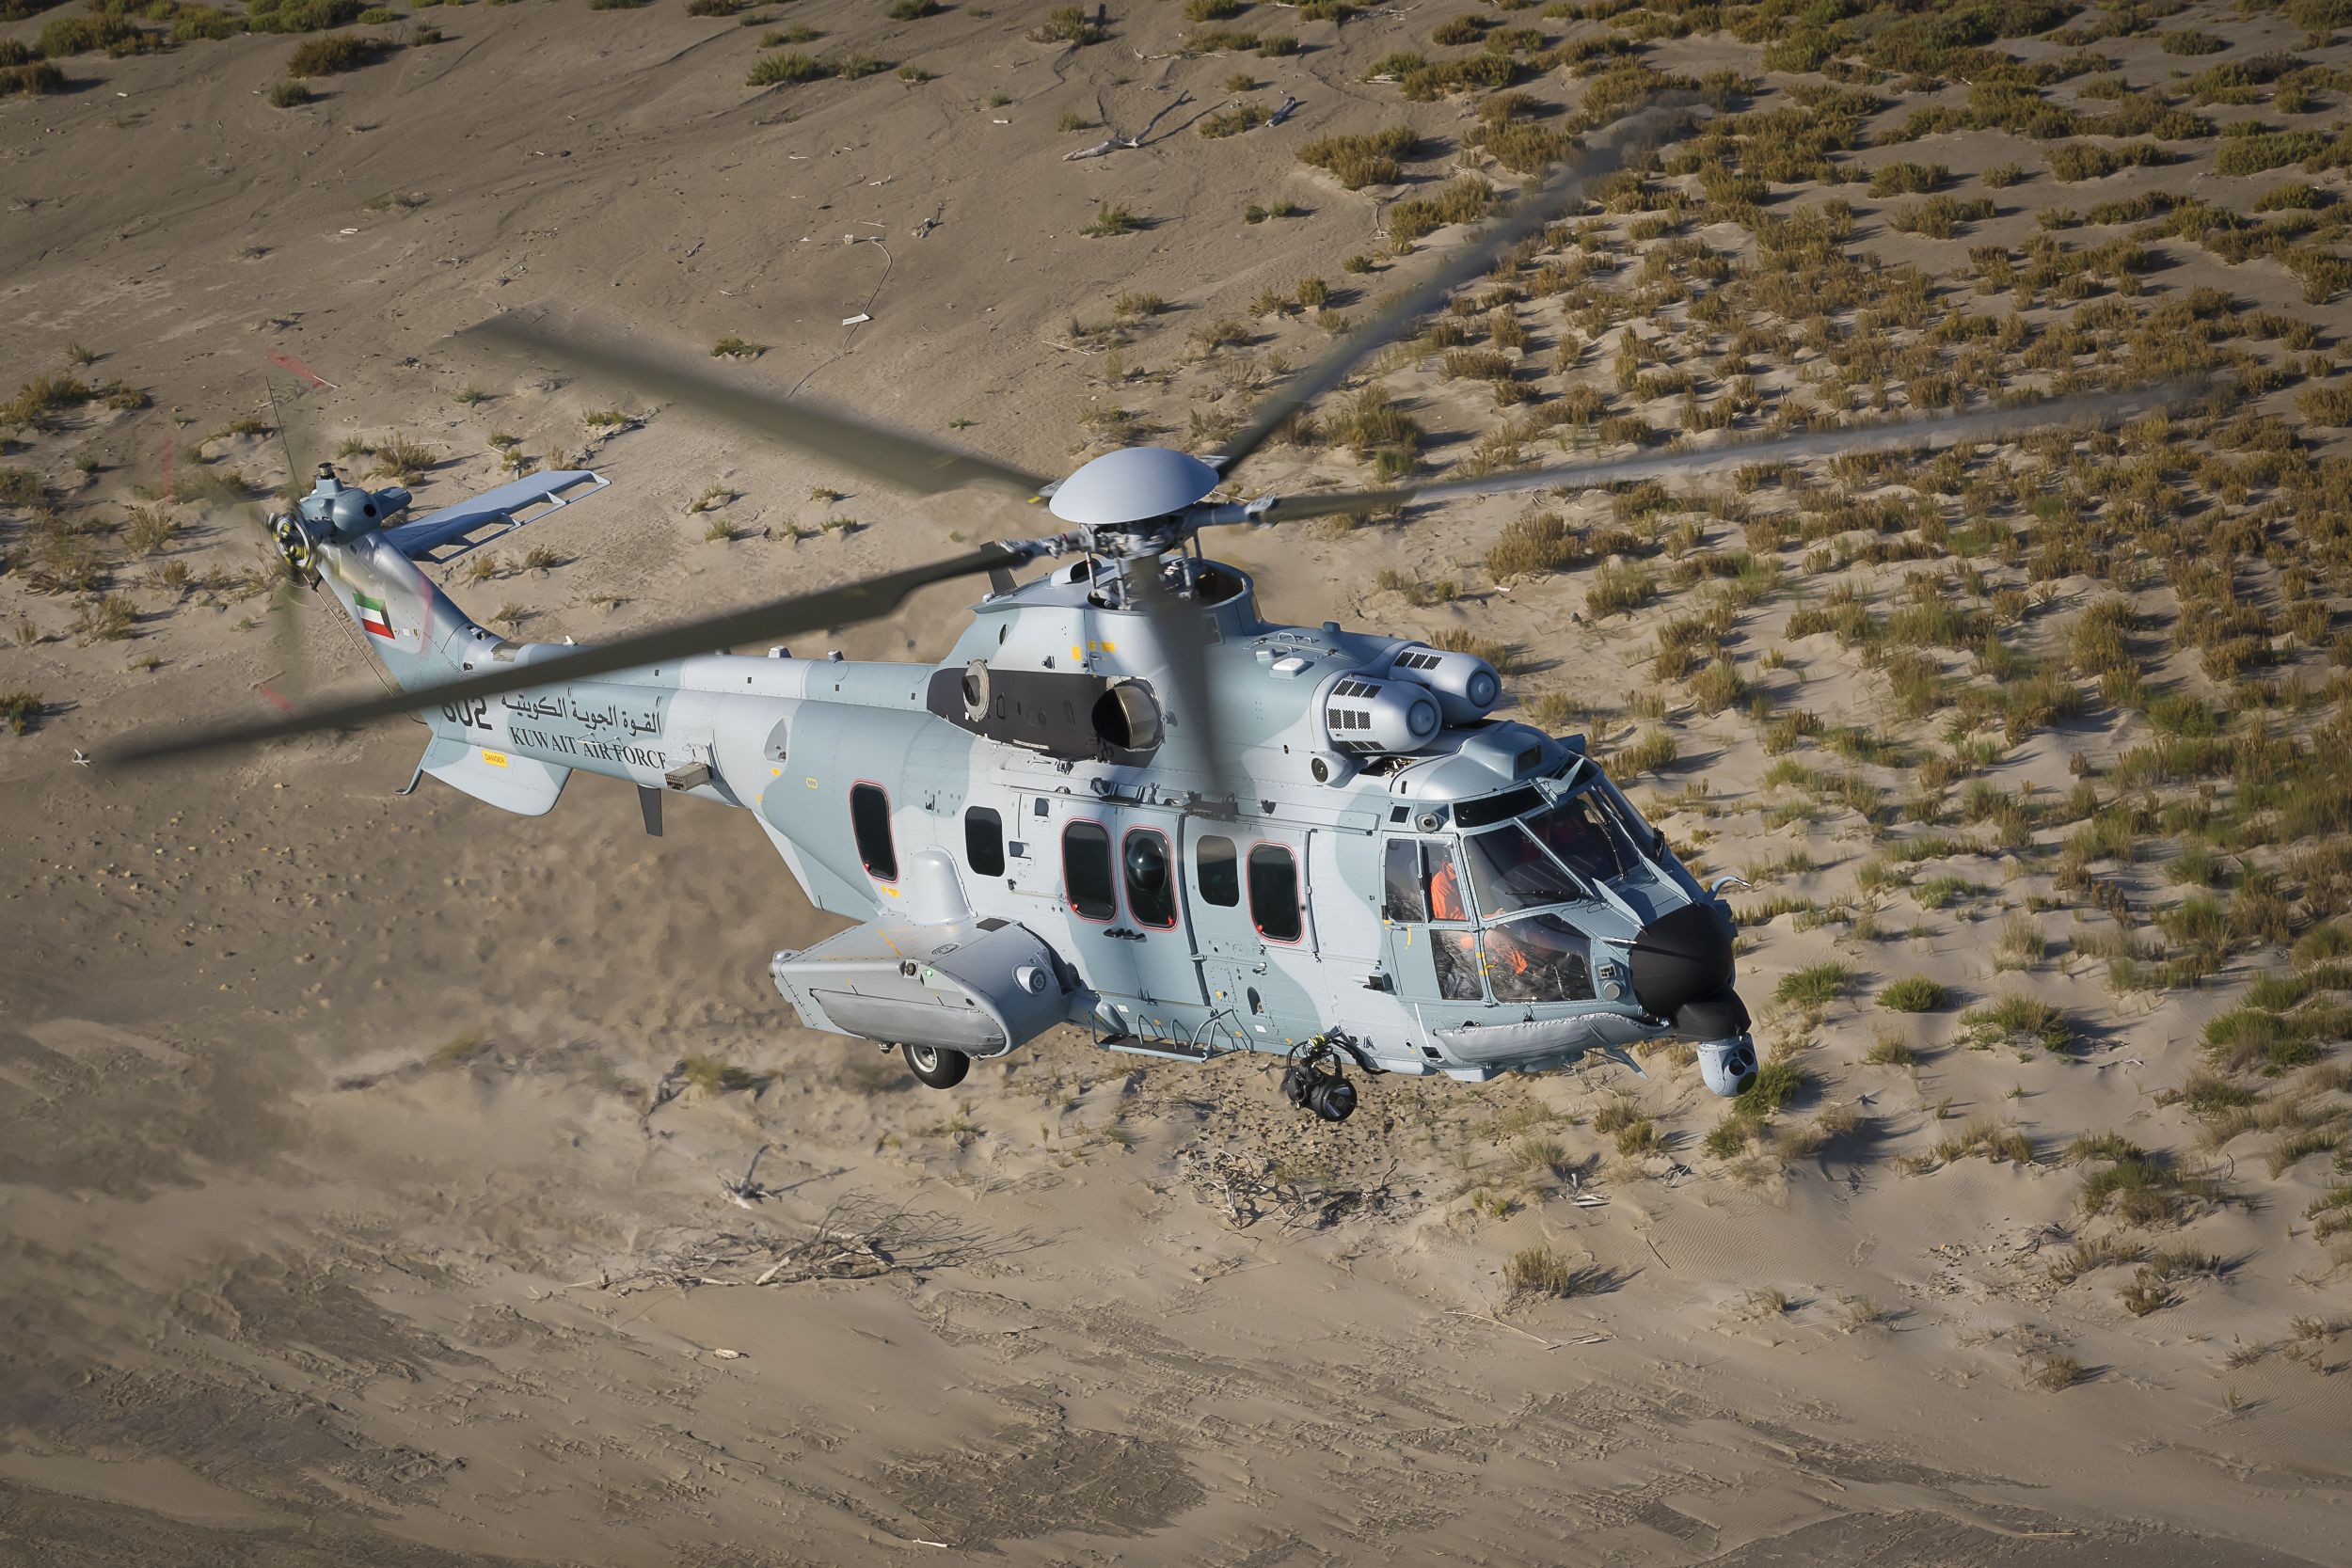 The first Airbus H225M helicopters to be delivered to Kuwait later this year have started flight testing. Kuwait ordered 30 of the long-range multi-role H225Ms in August 2016. They will be operated by the Kuwait Air Force and the Kuwait National Guard. Click to enlarge.